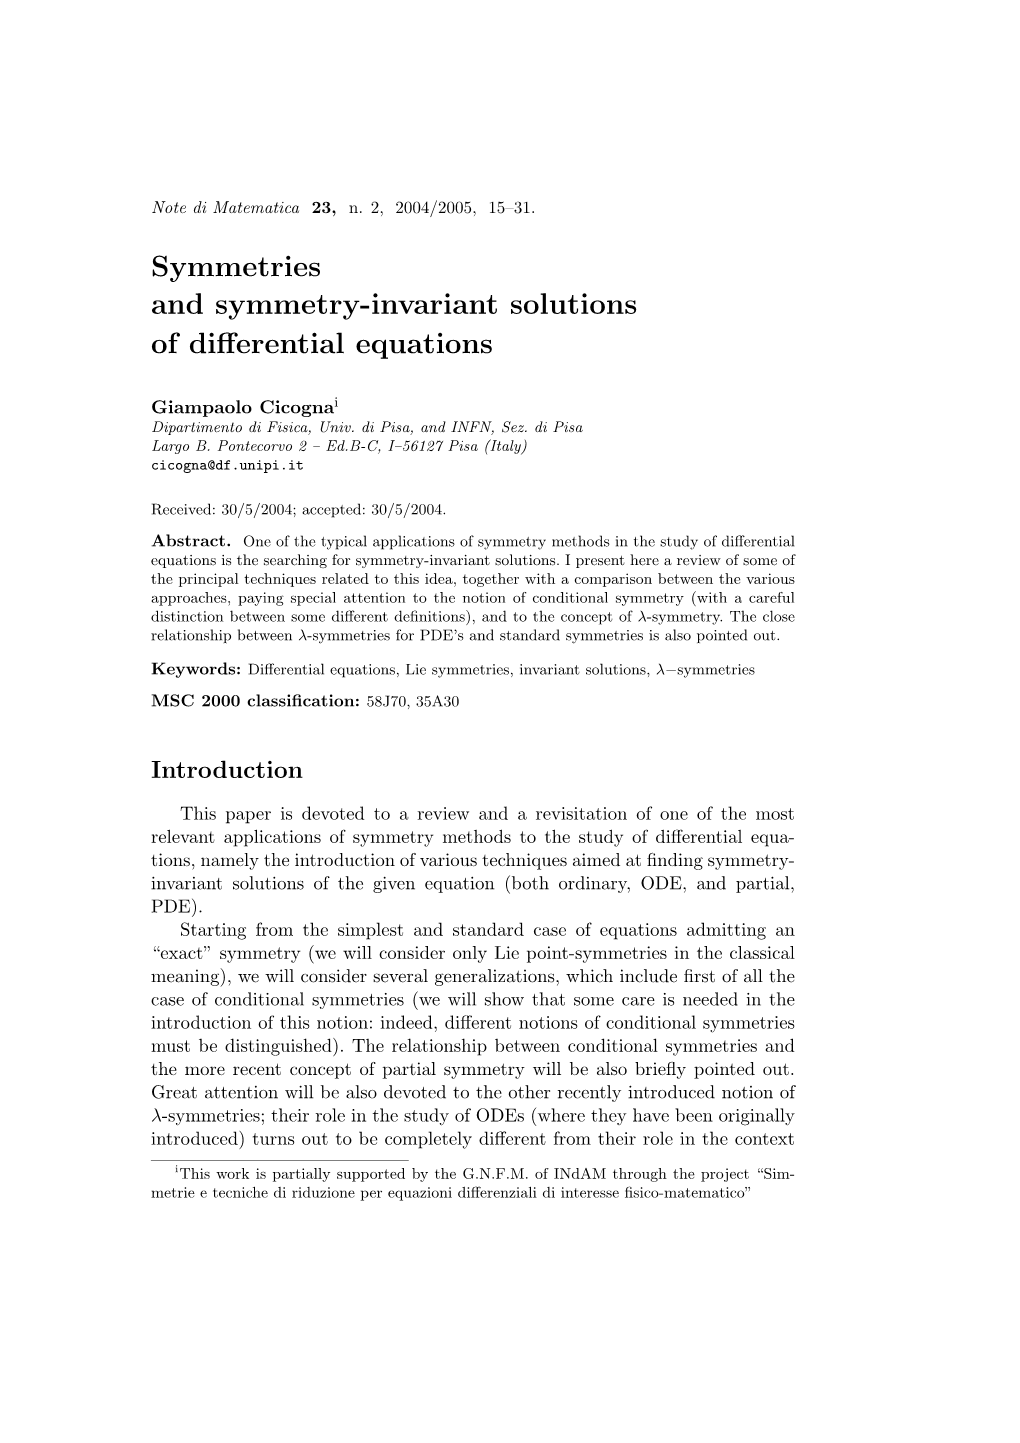 Symmetries and Symmetry-Invariant Solutions of Differential Equations